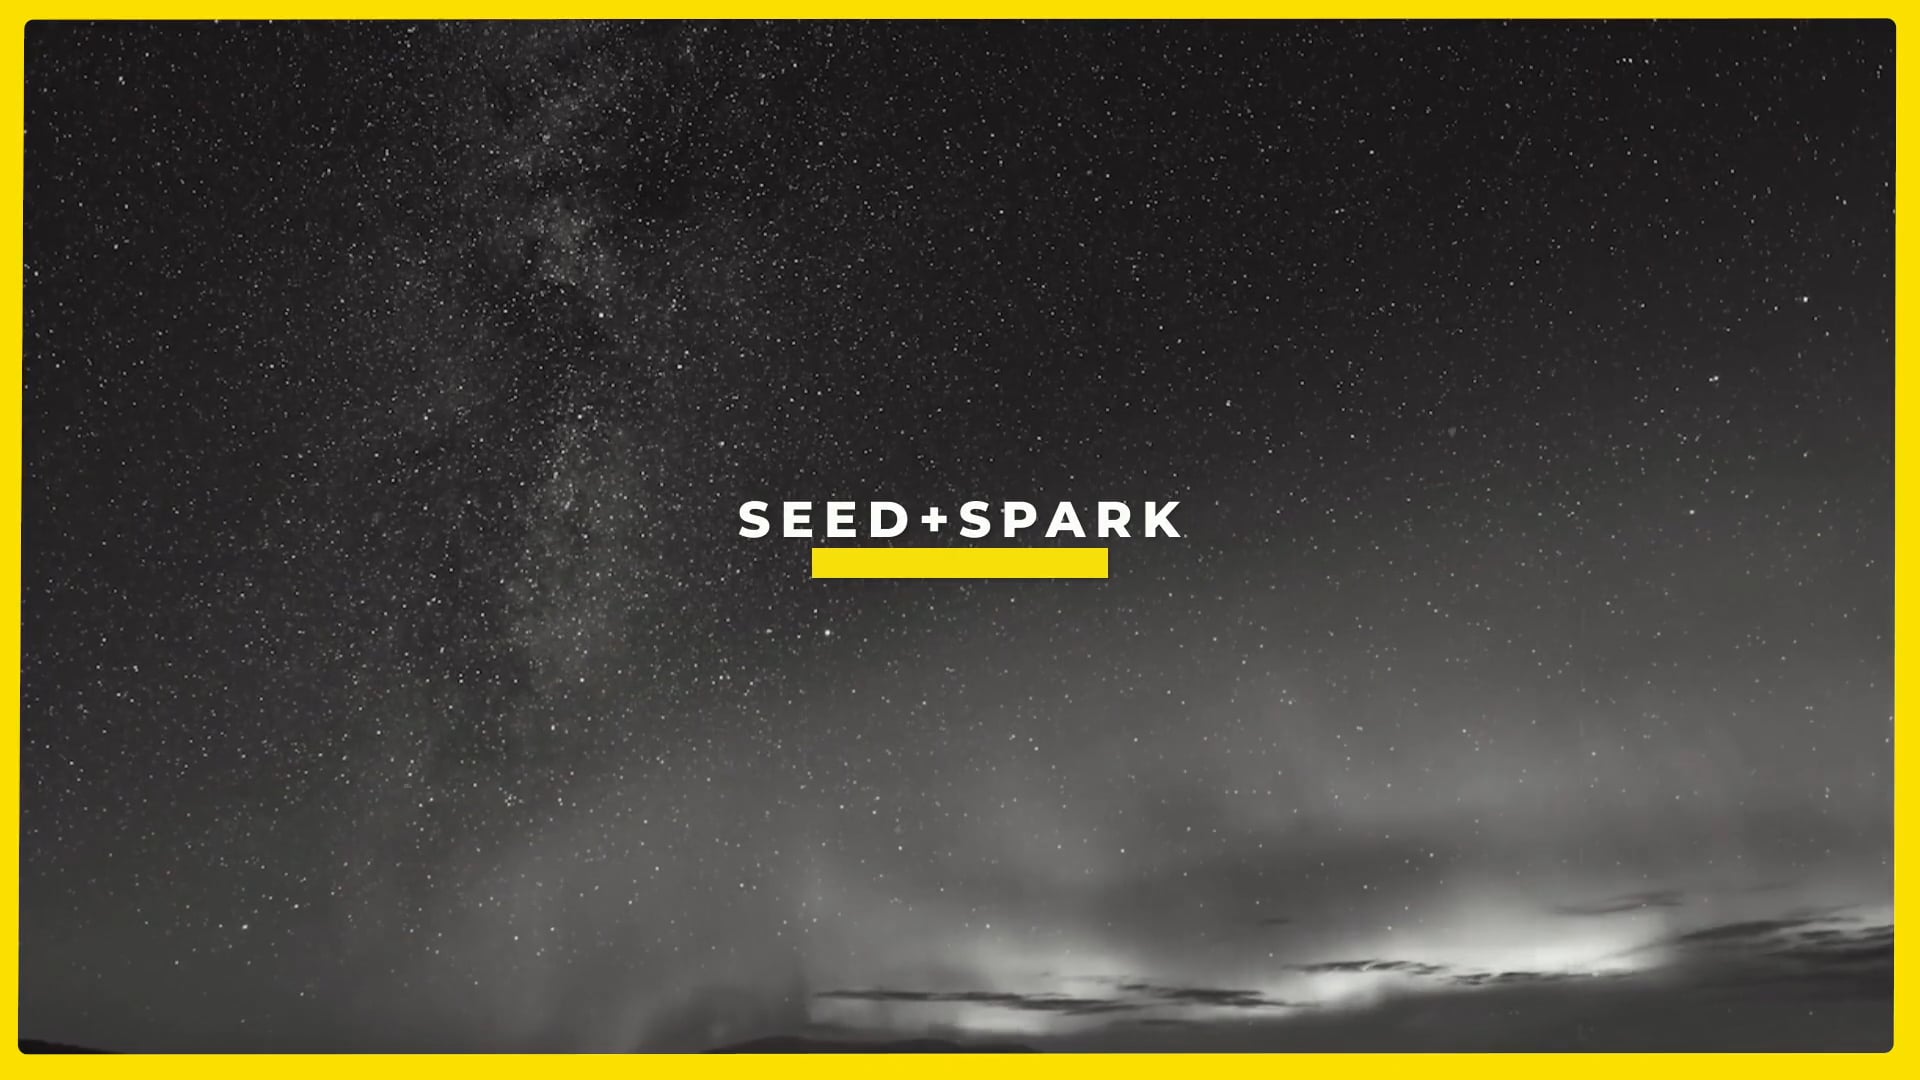 Seed + Spark - Contents